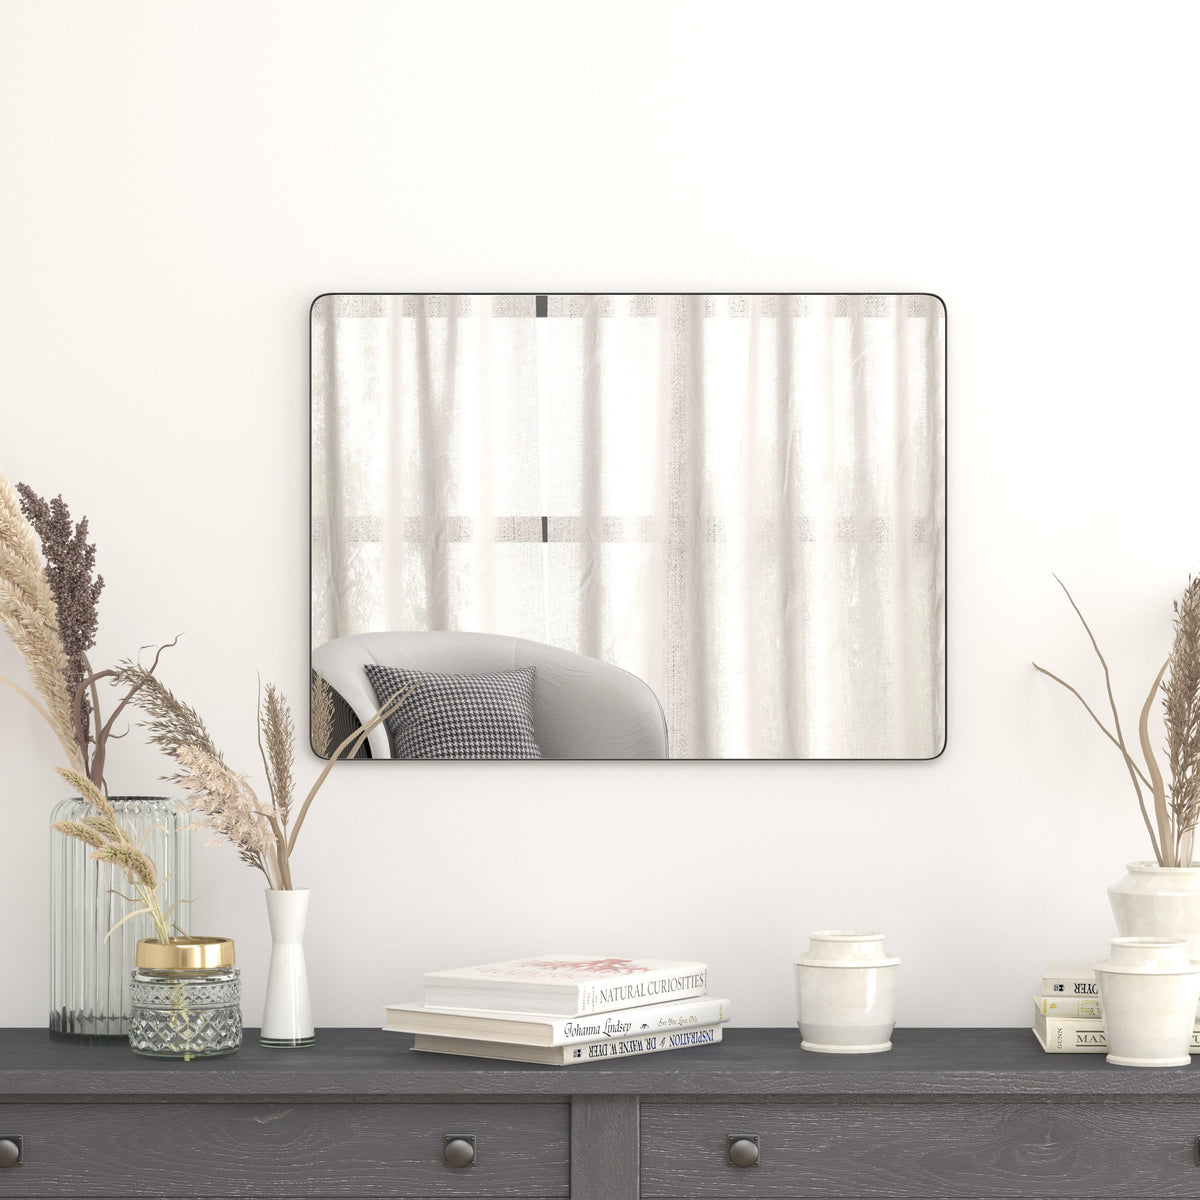 22"W x 30"L |#| Horizontal or Vertical Accent Wall Mount Mirror with Black Metal Frame-22" x 30"